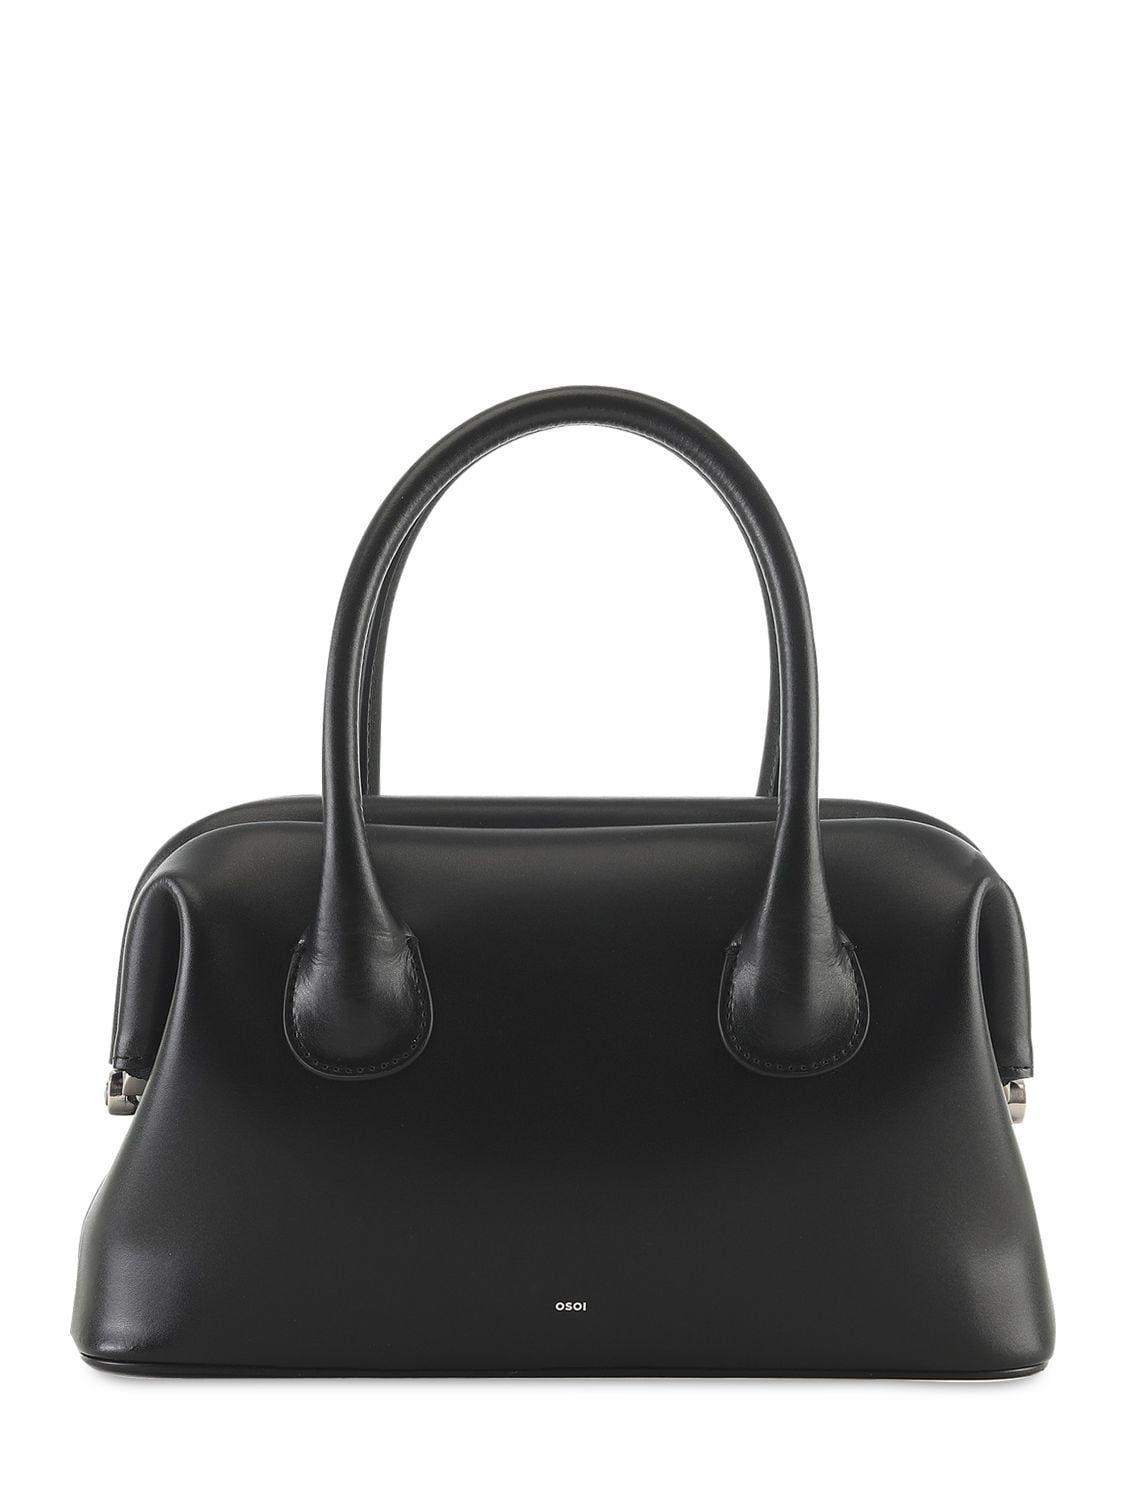 OSOI Boat Brot Leather Top Handle Bag in Black | Lyst